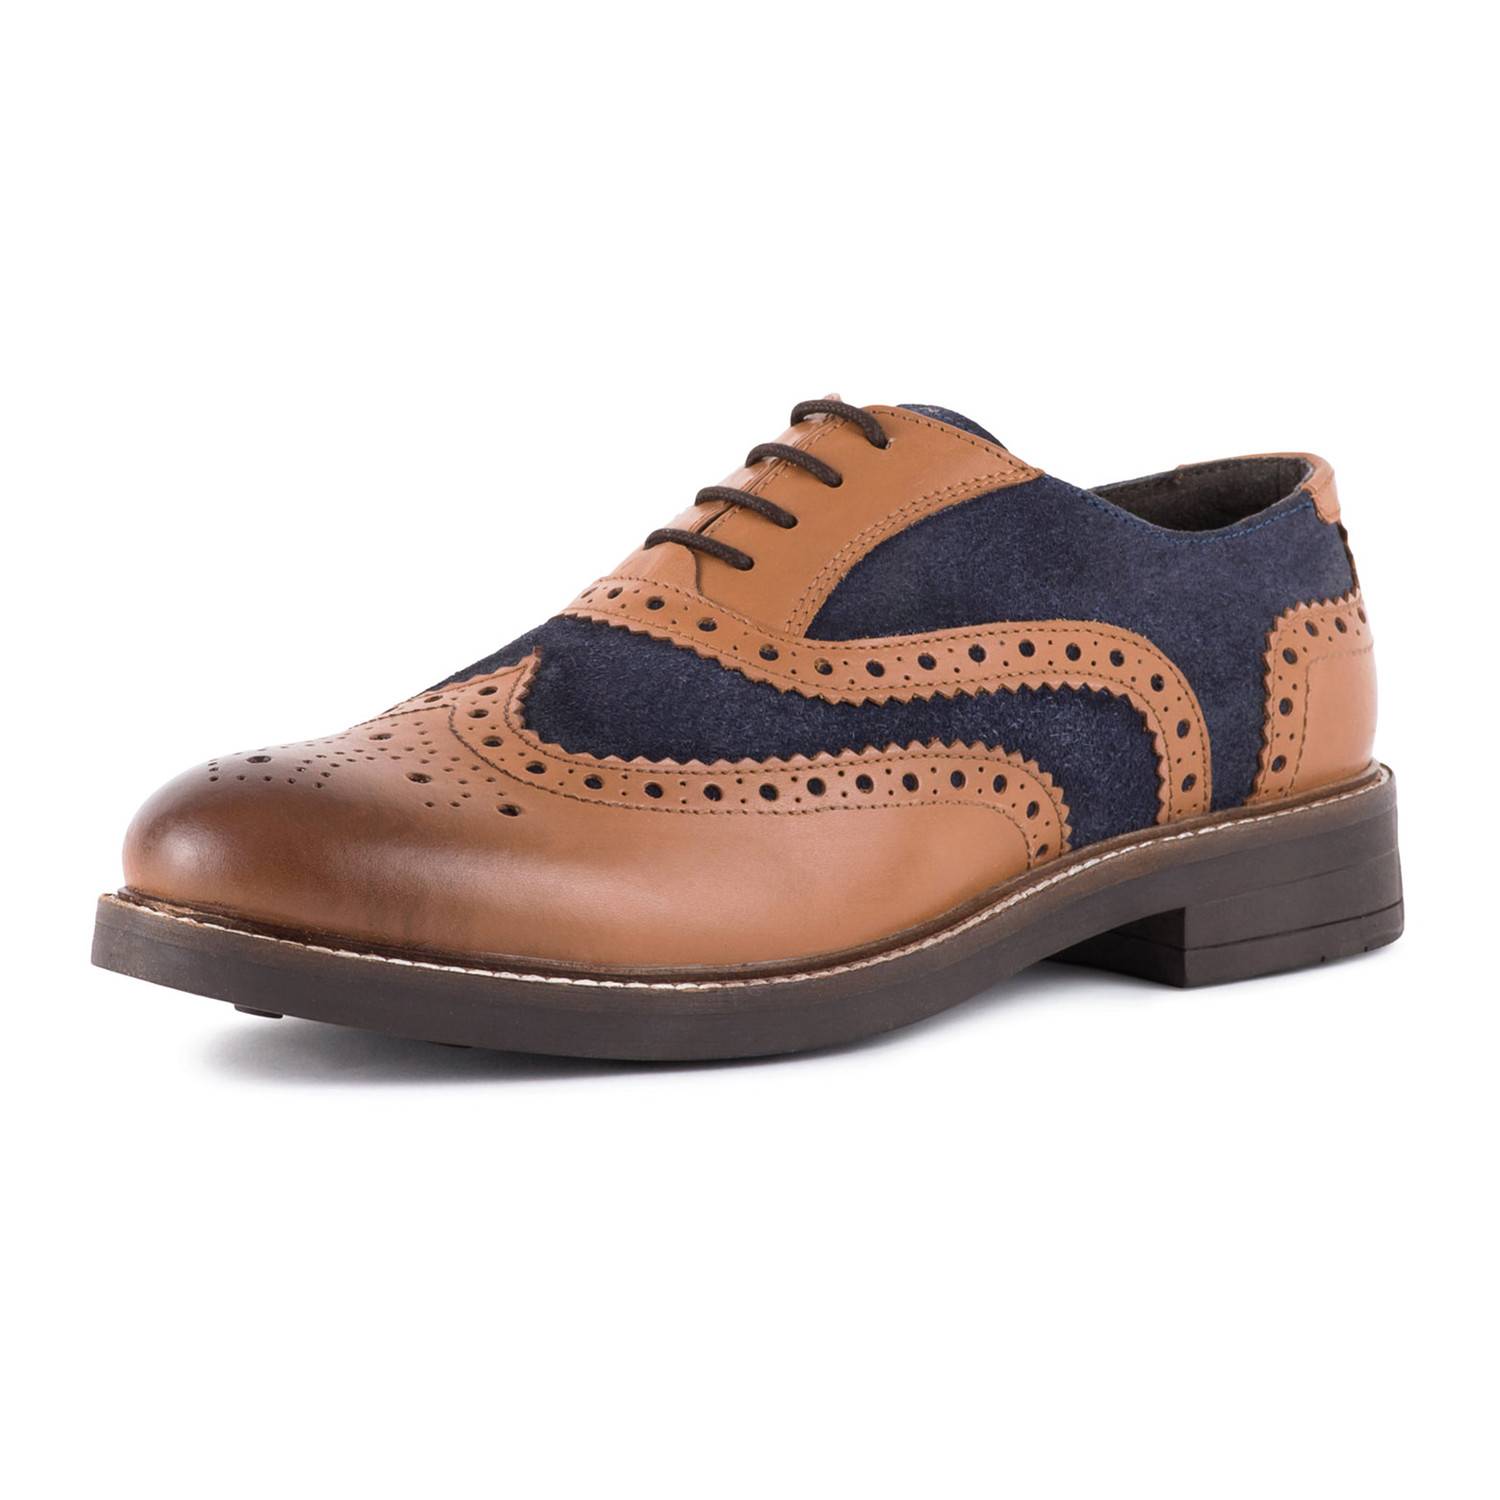 redfoot leather brogues